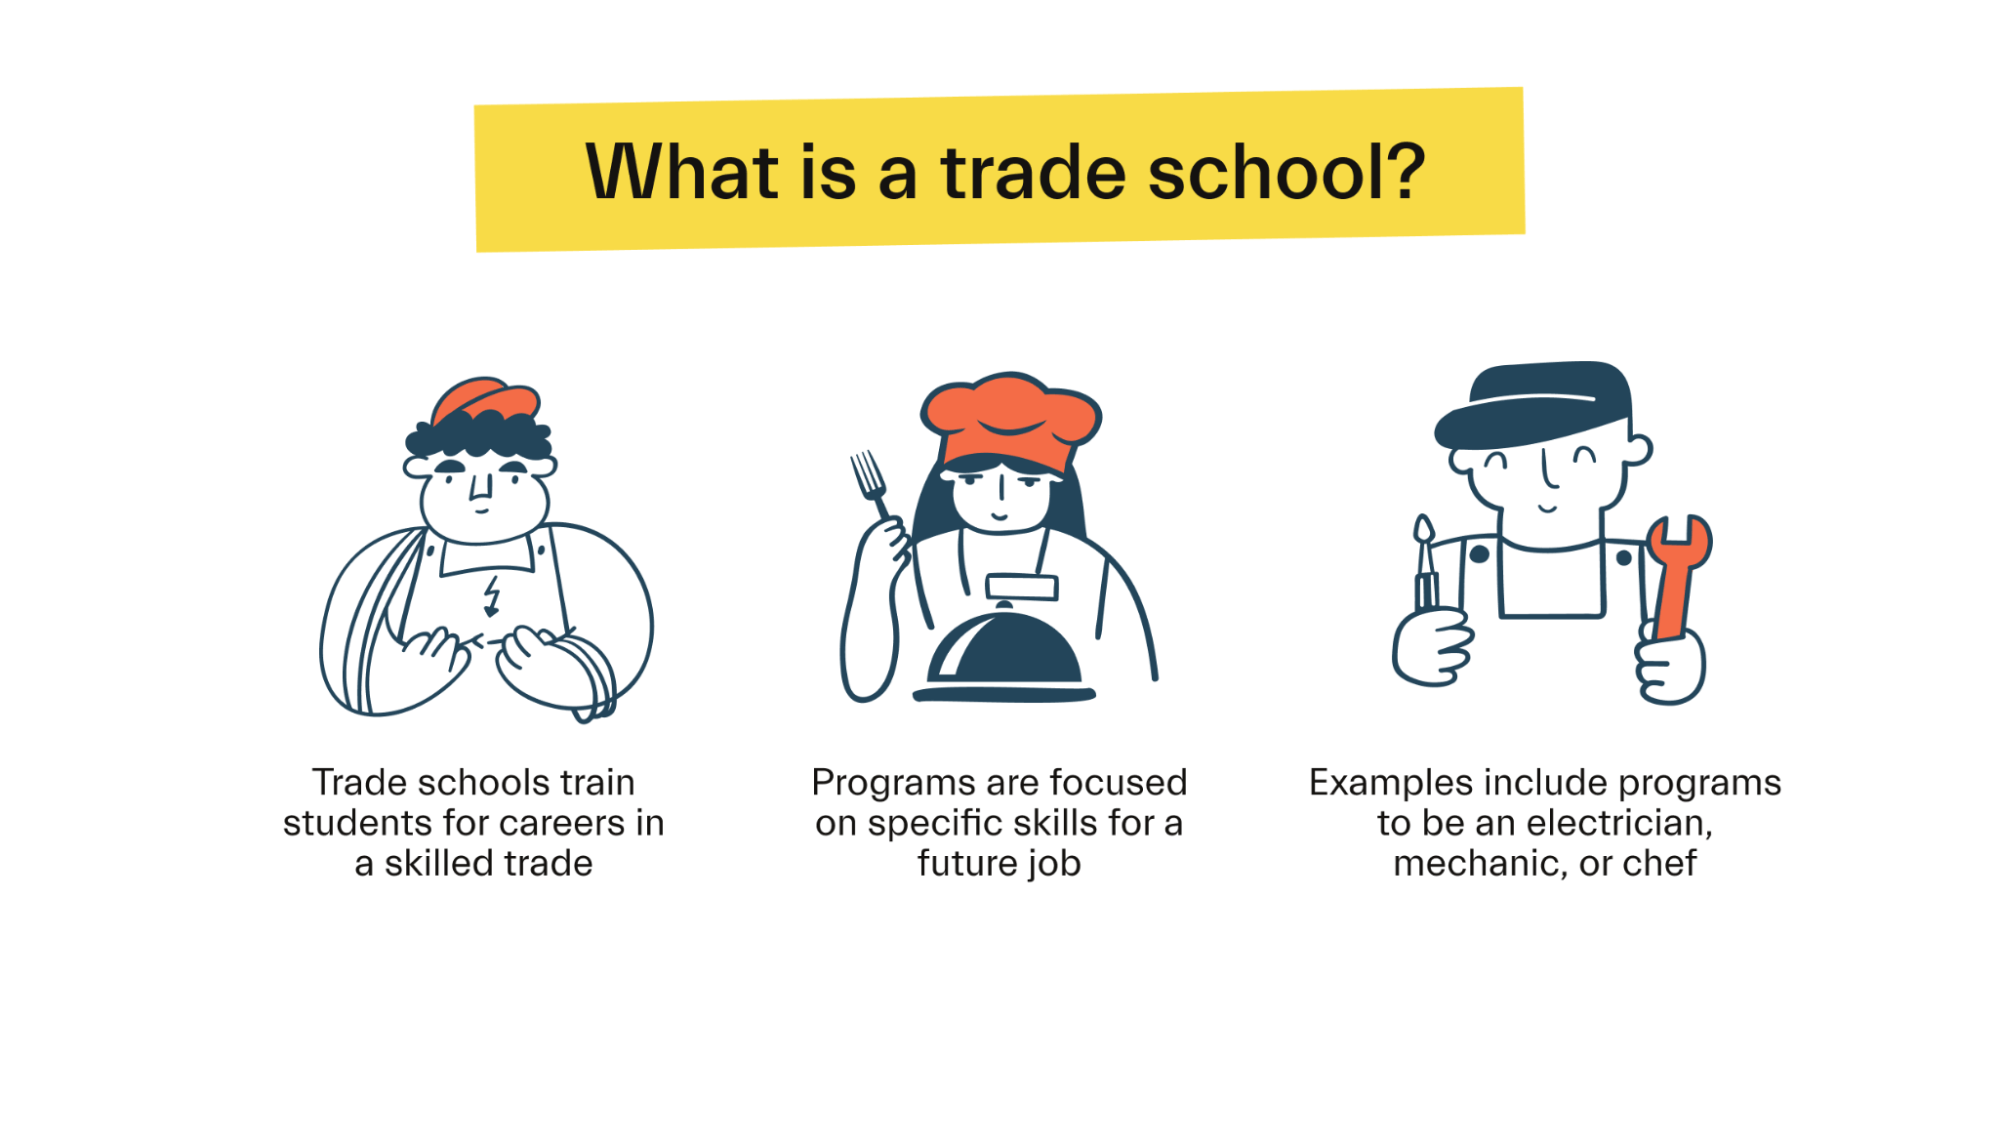 What is a trade school